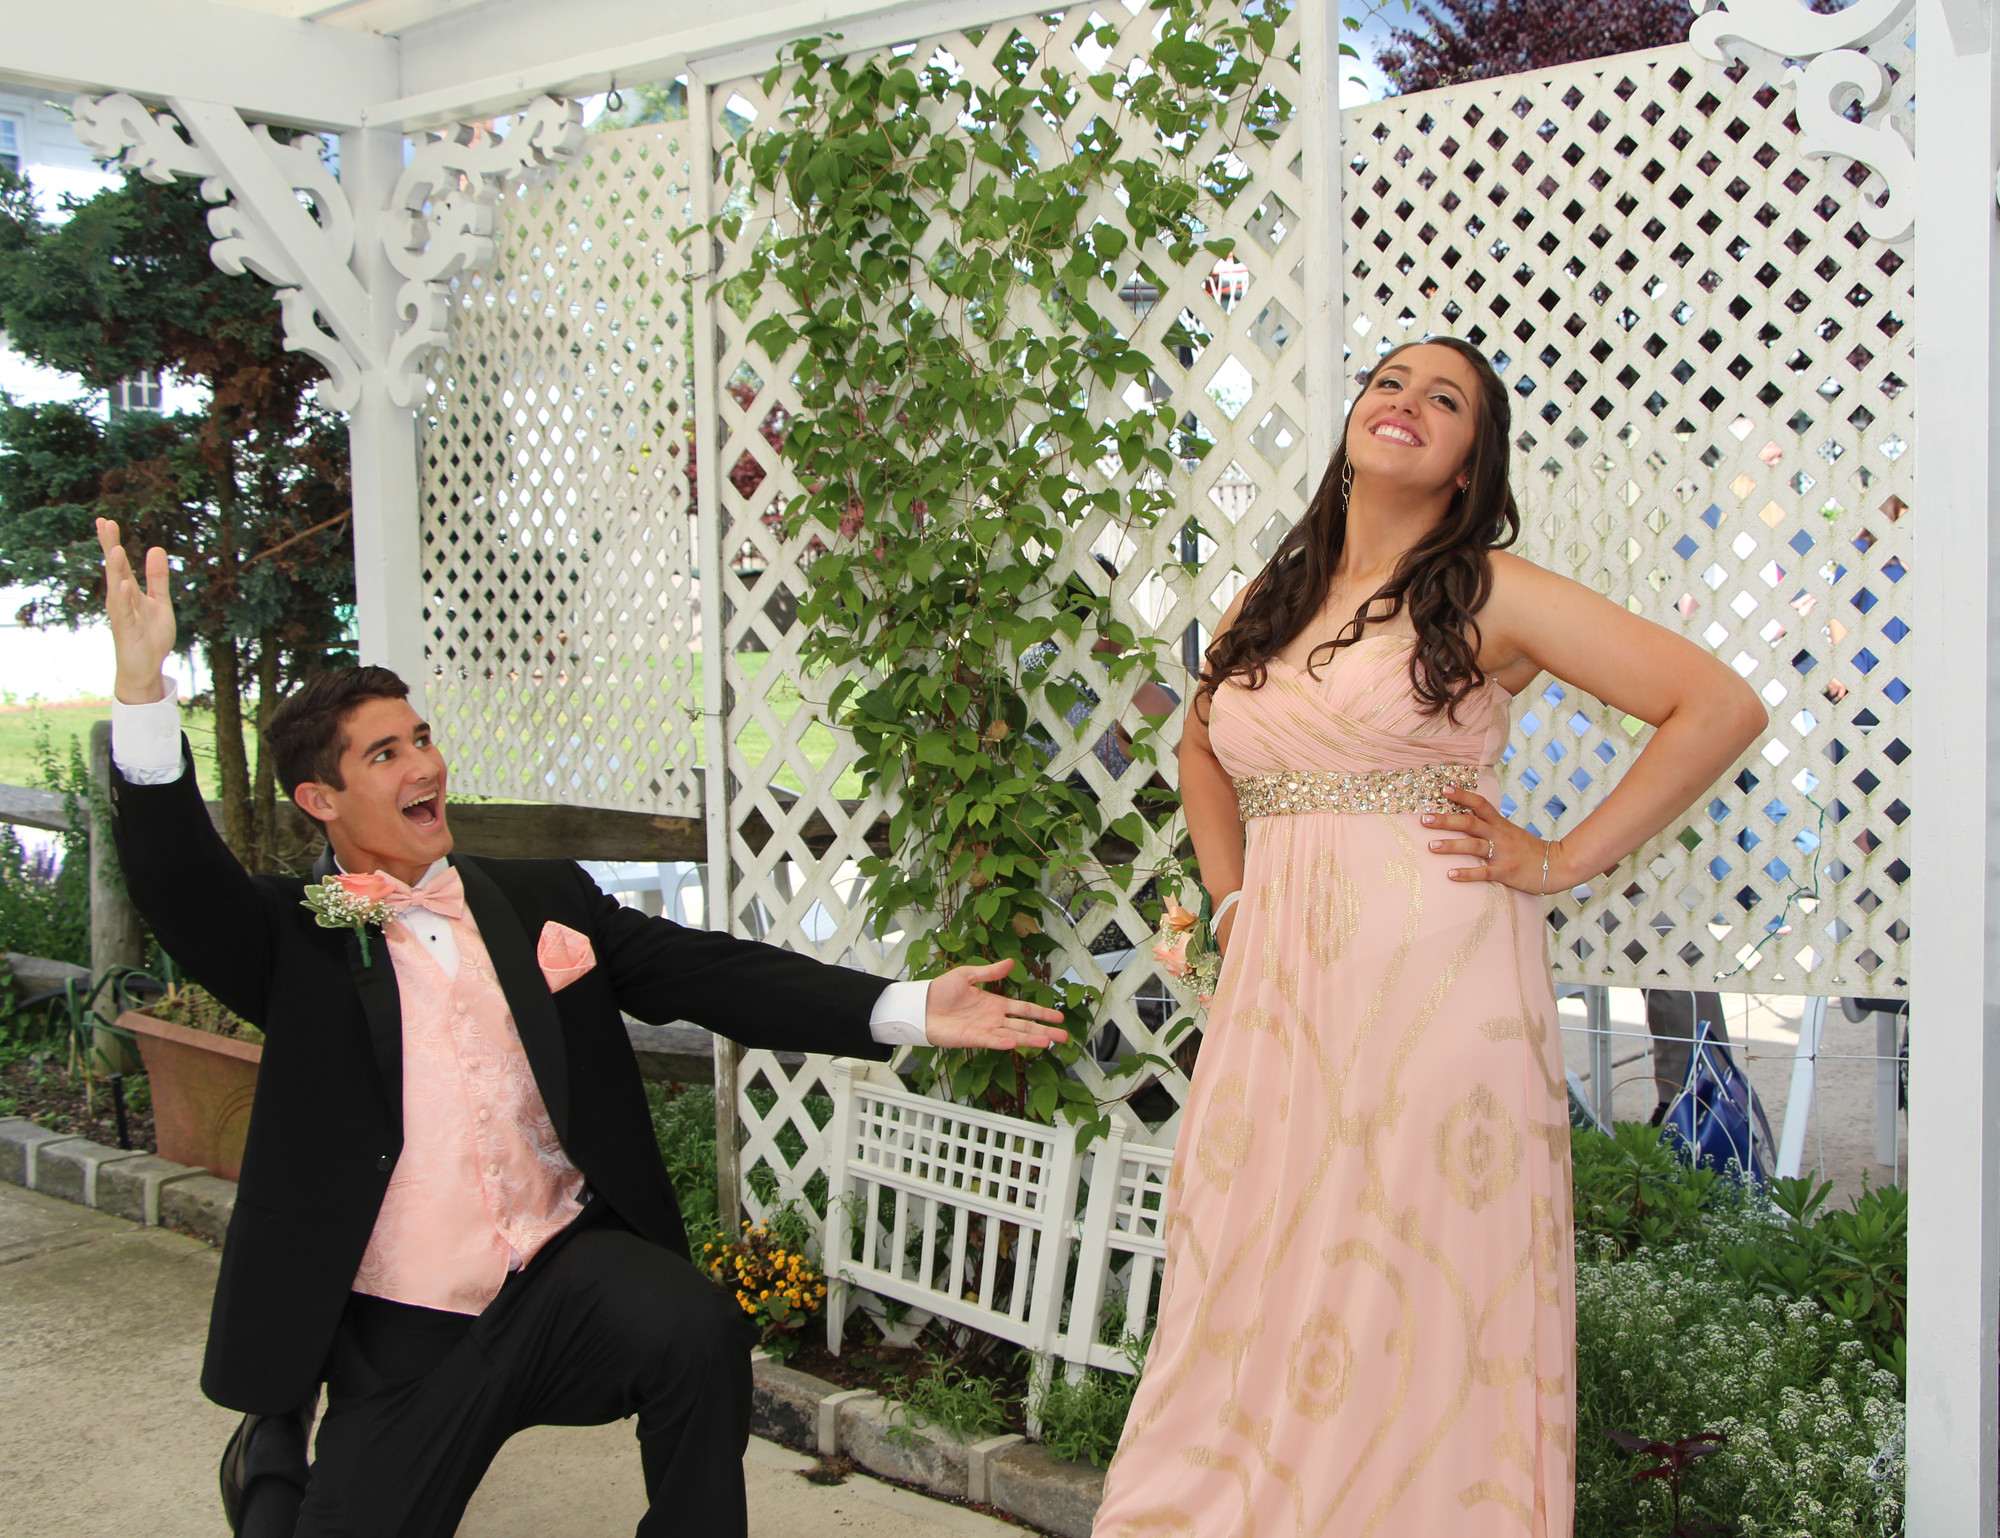 Joseph Orselli and Hannah Marrero were ready for their prom — a night of high drama.